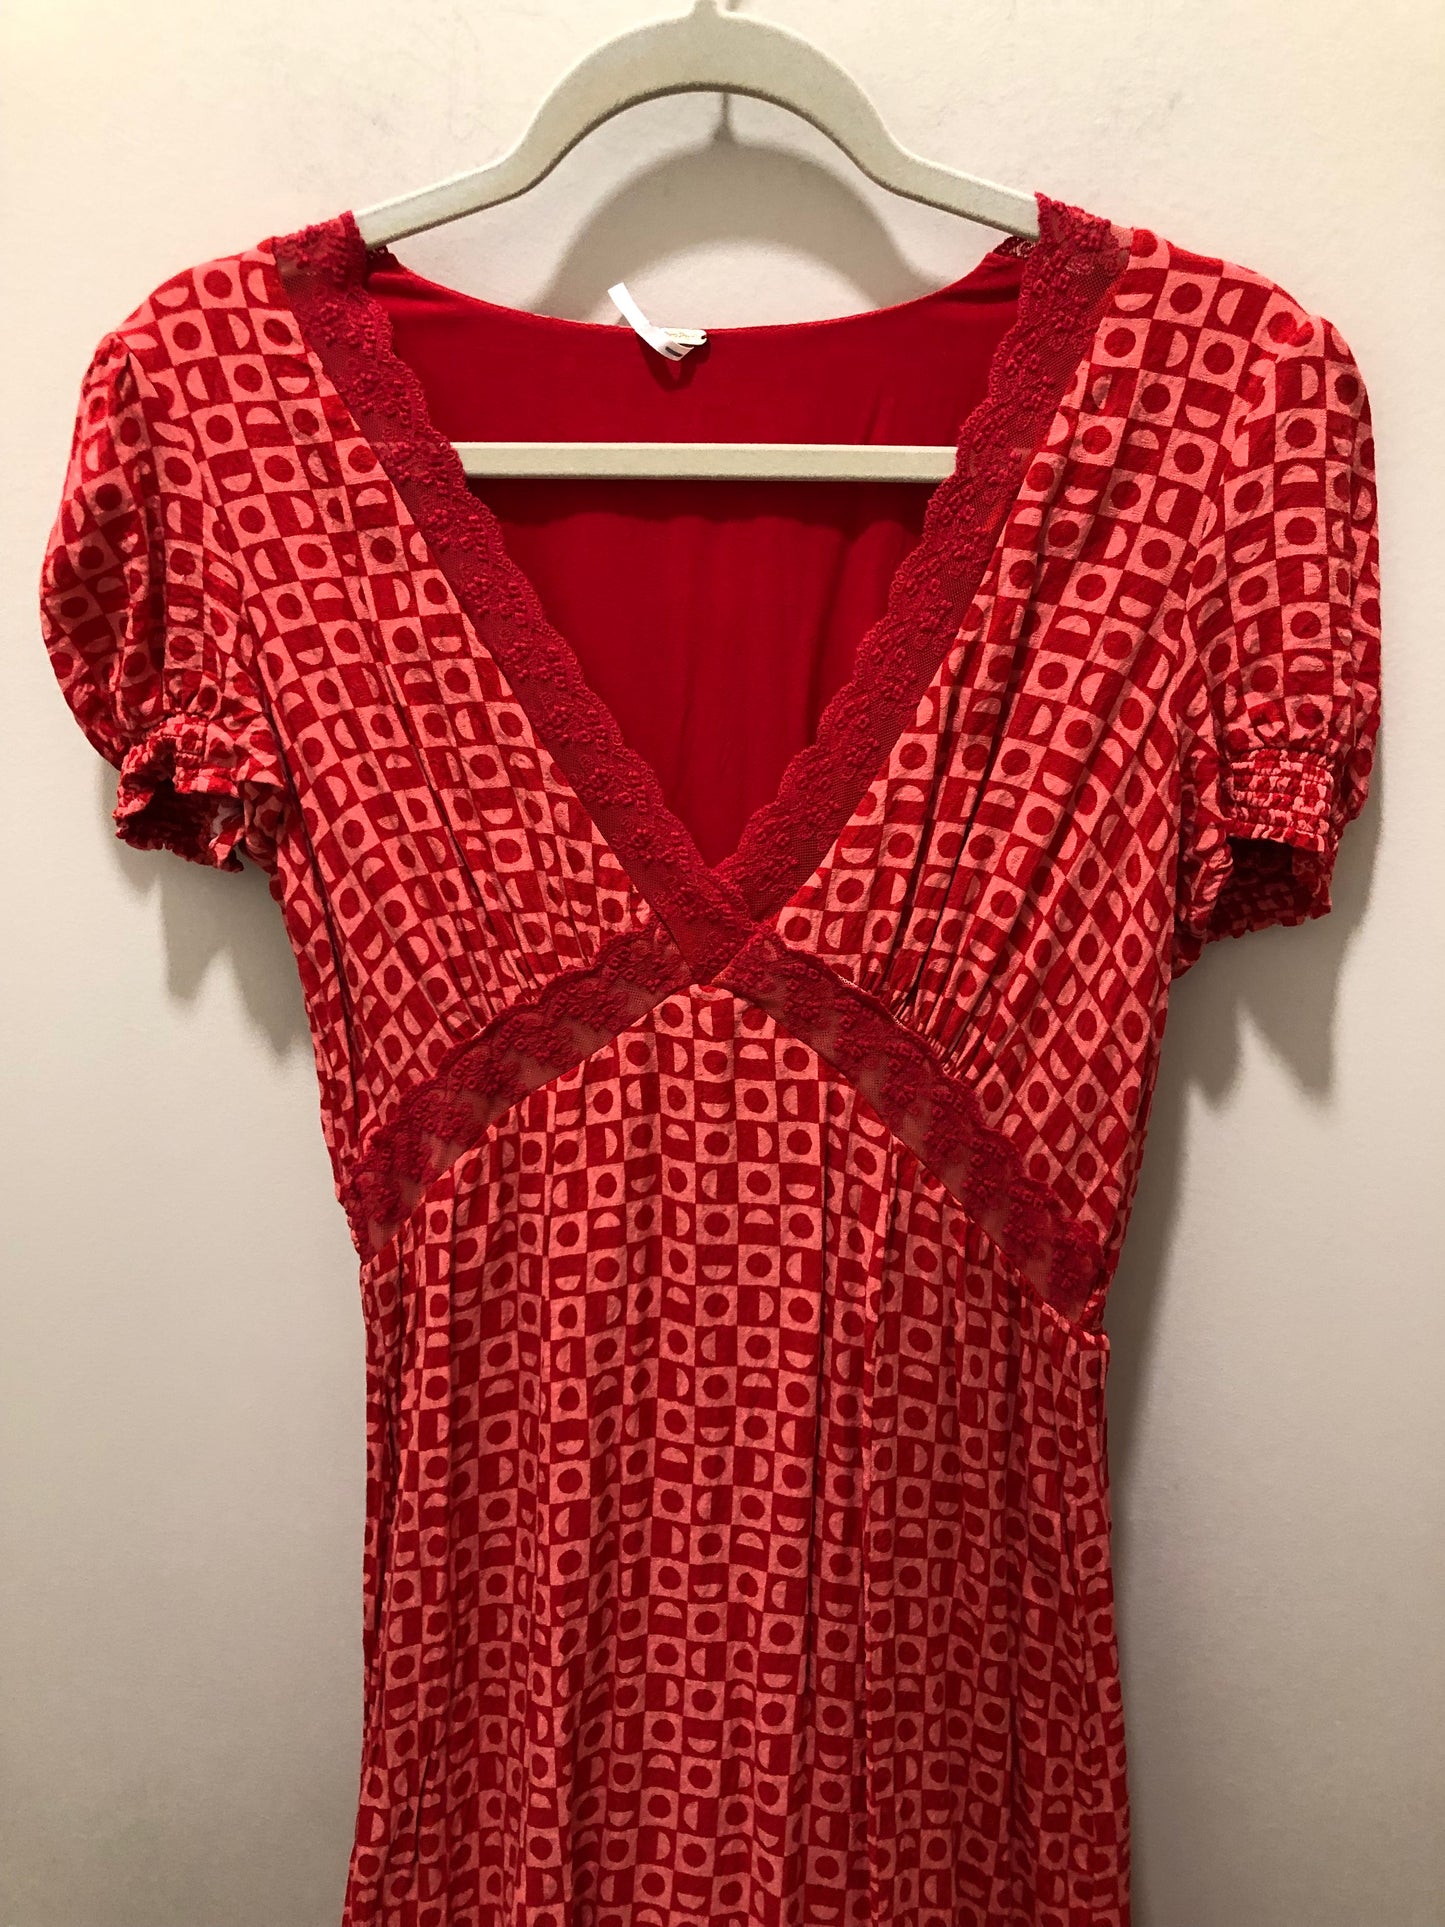 Free People Adult Size Small Red Print Dress